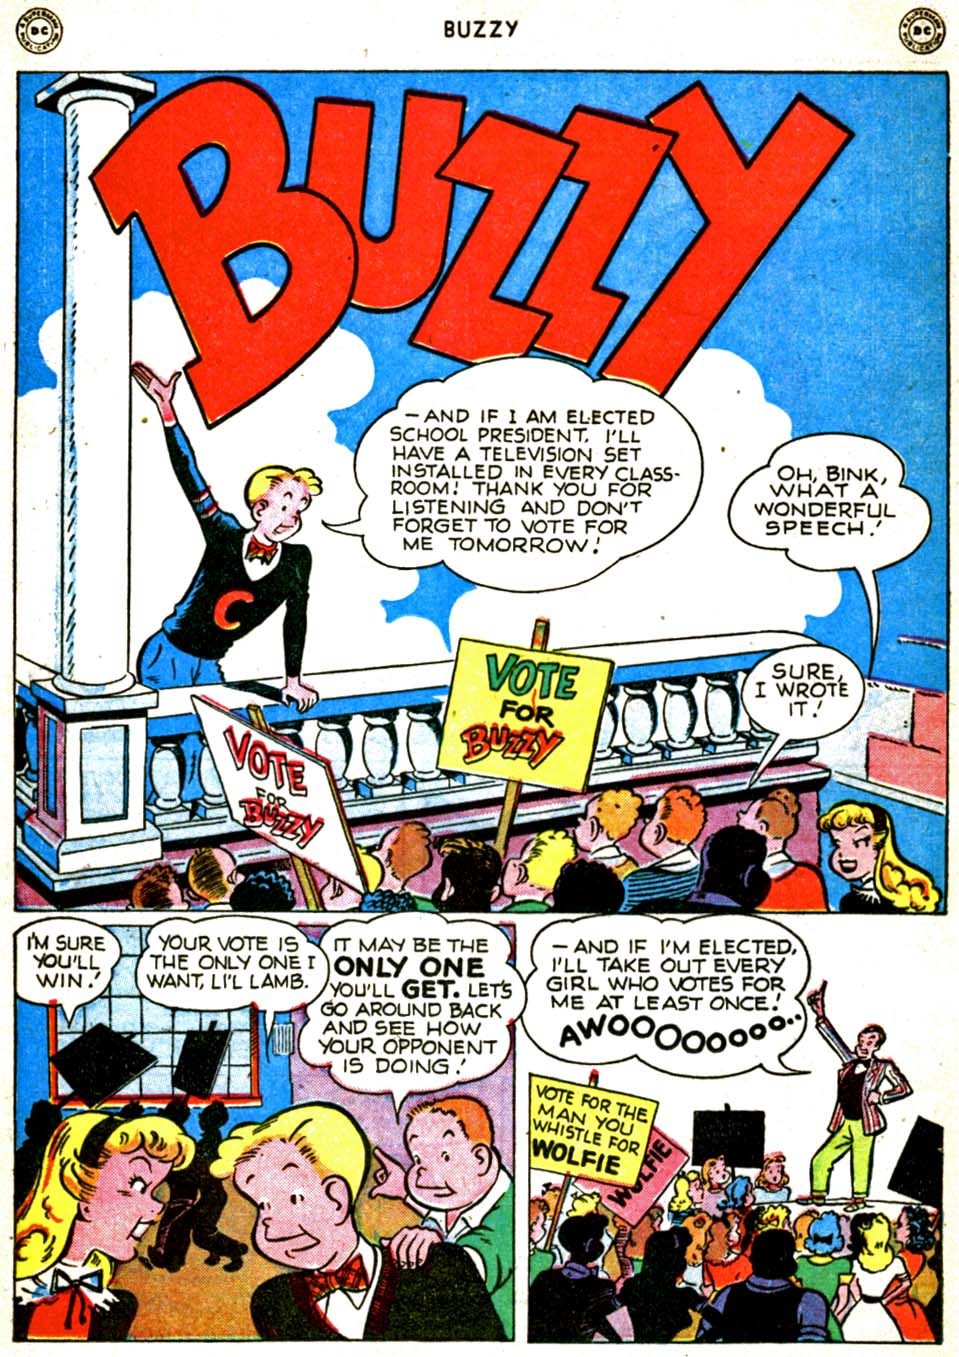 Read online Buzzy comic -  Issue #20 - 18